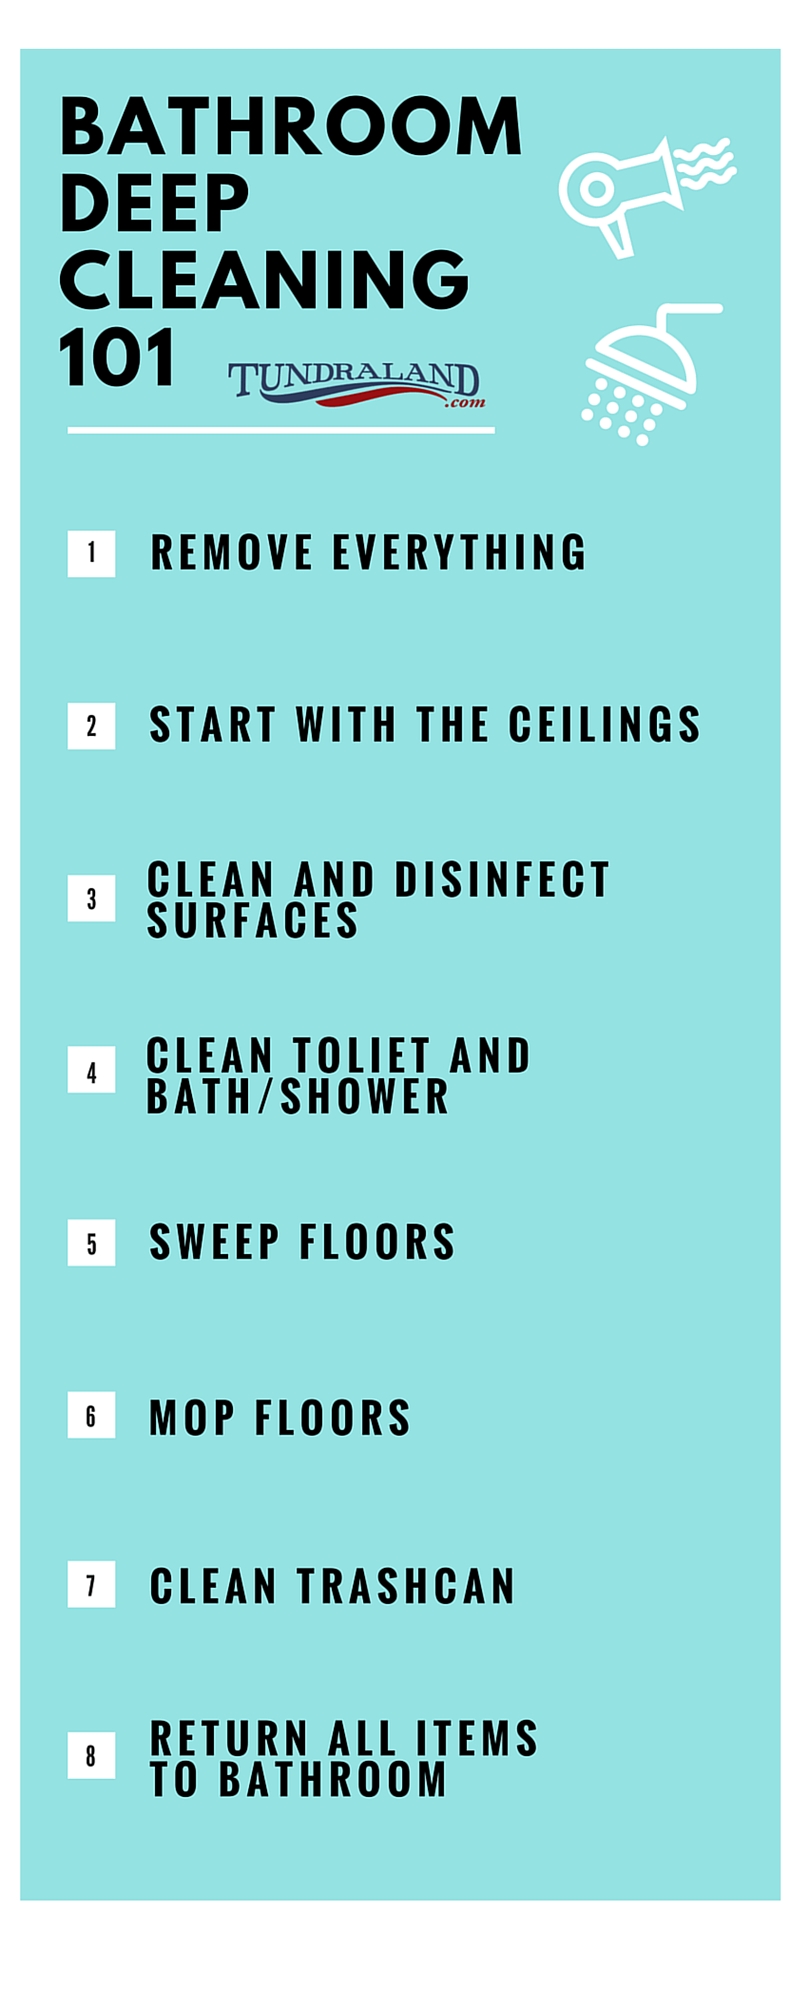 Top 10 Fast and Simple Bathroom Cleaning Tips